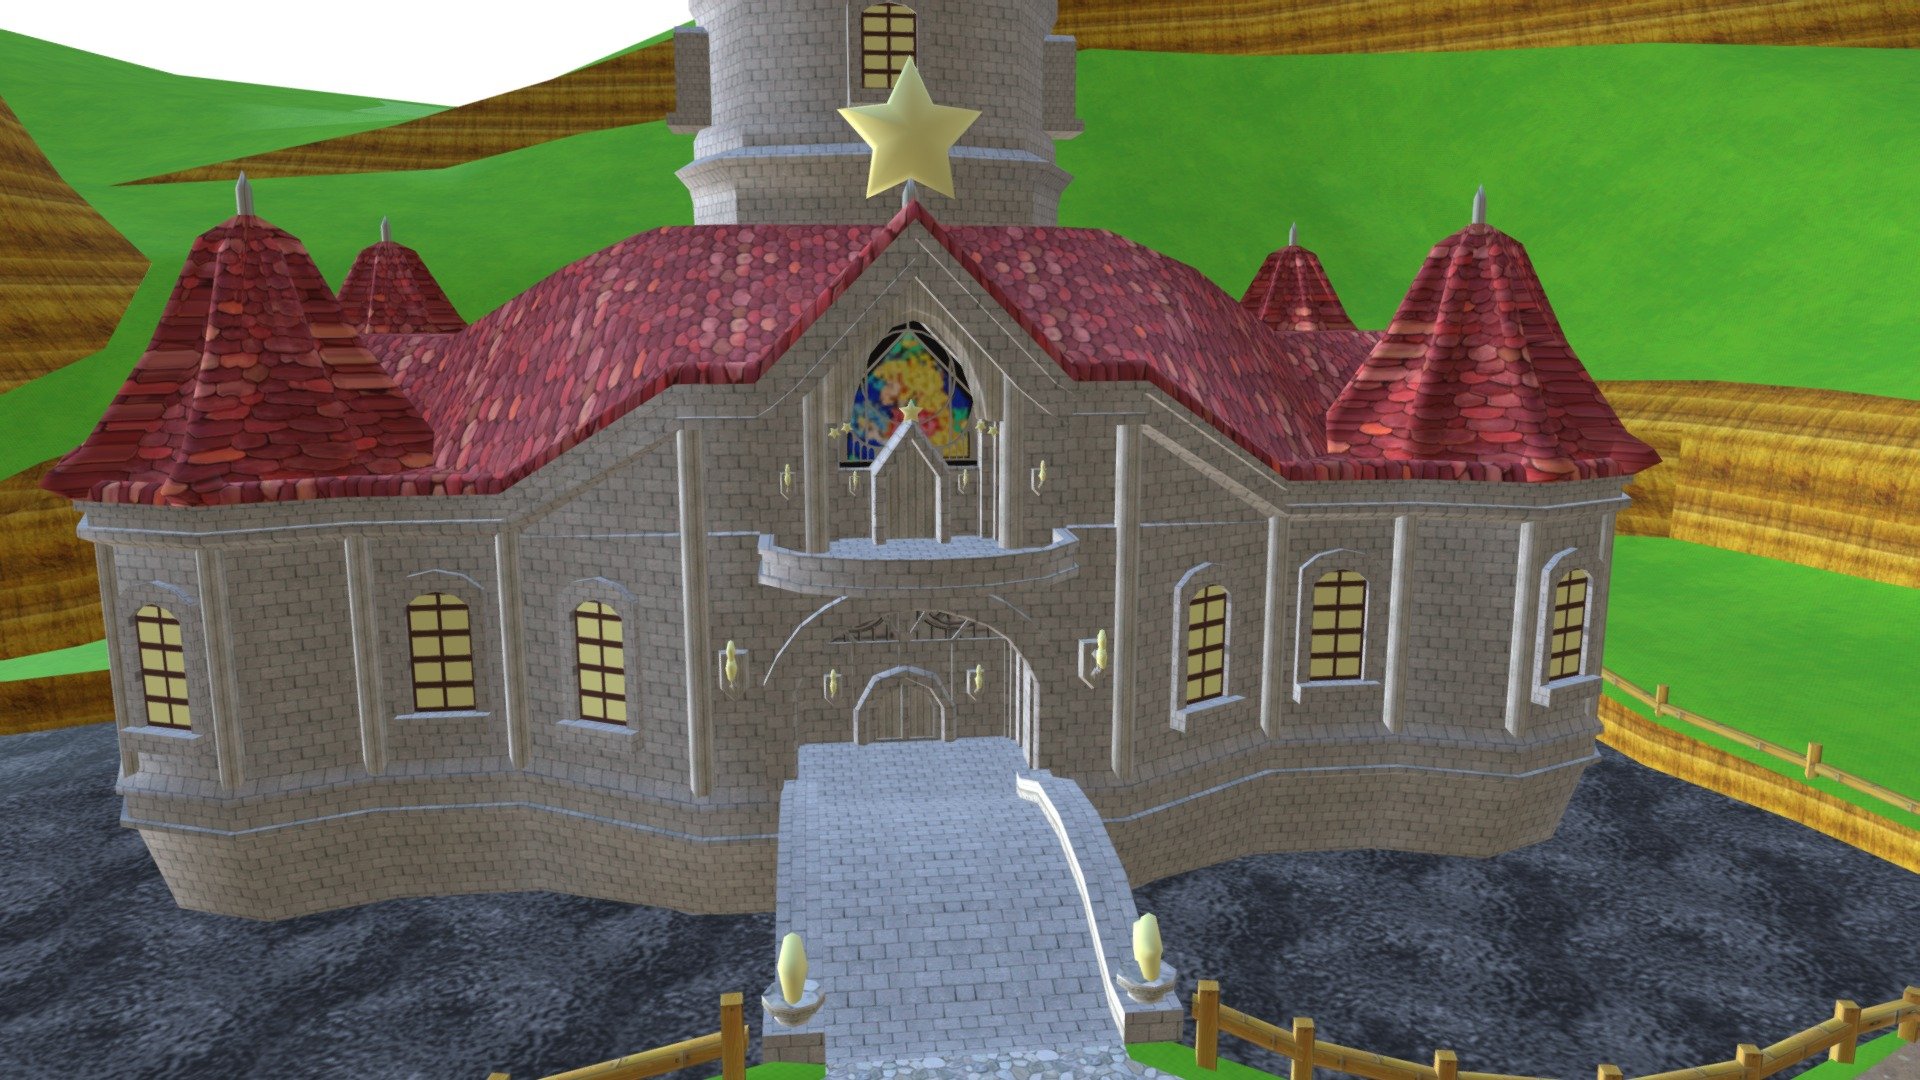 [FULL] Peach's Castle Download Free 3D model by mlouise507